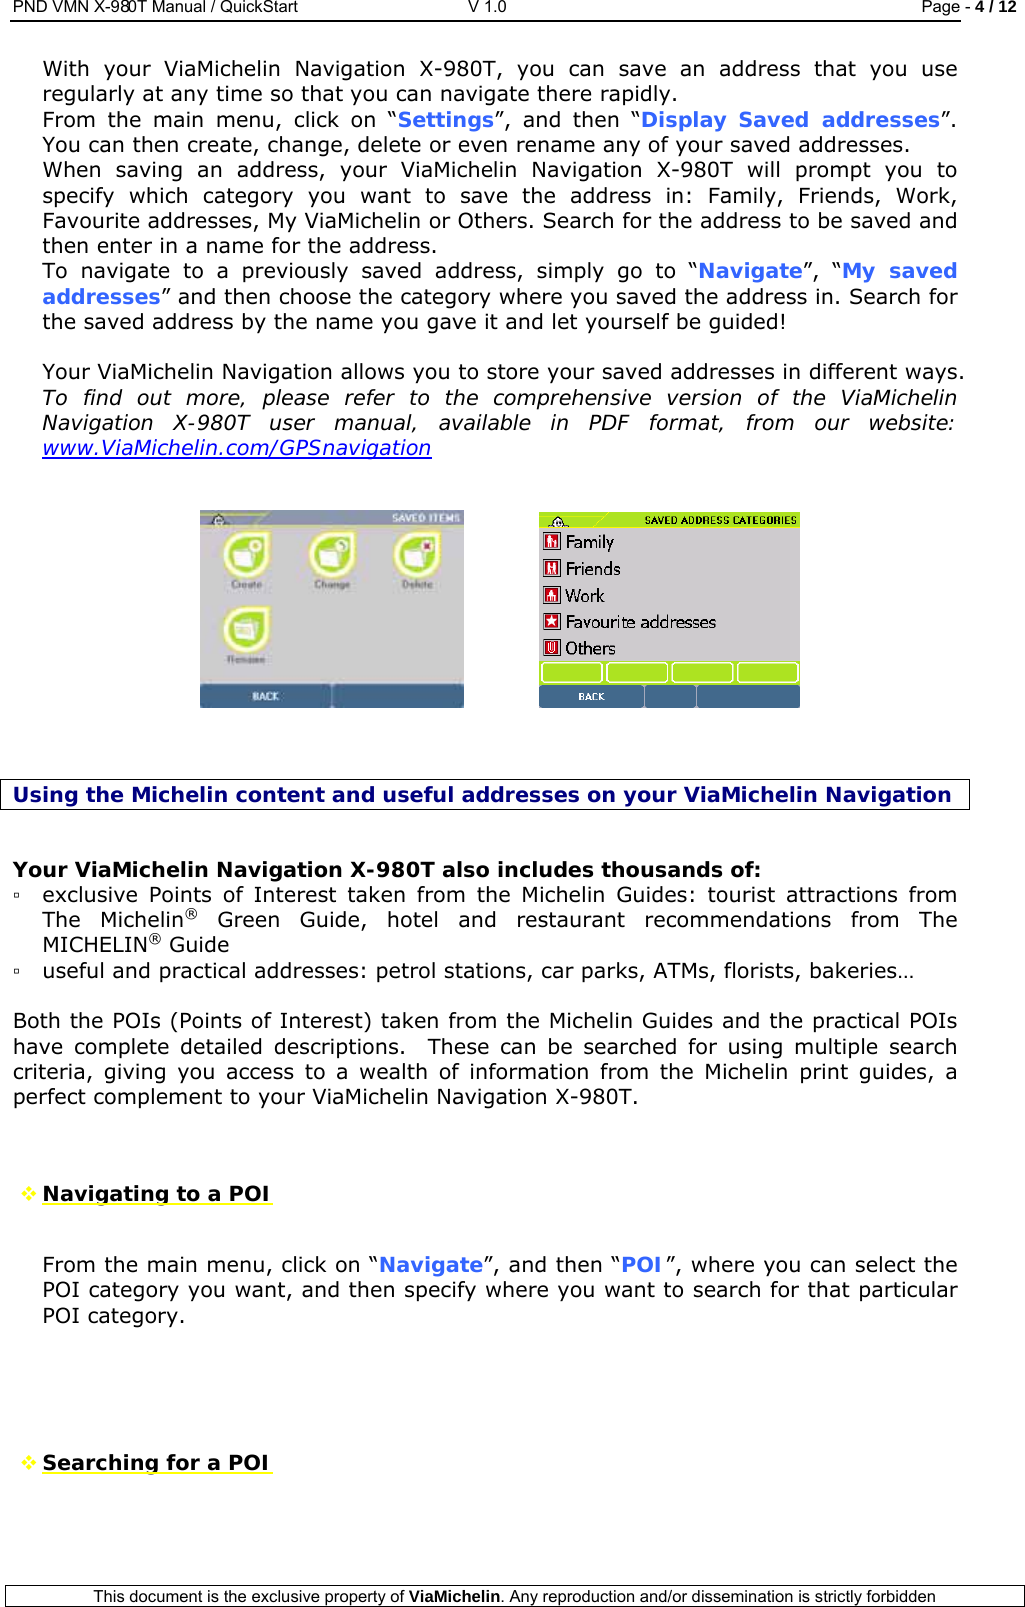 PND VMN X-980T Manual / QuickStart   V 1.0  Page - 4 / 12  This document is the exclusive property of ViaMichelin. Any reproduction and/or dissemination is strictly forbidden  With your ViaMichelin Navigation X-980T, you can save an address that you use regularly at any time so that you can navigate there rapidly. From the main menu, click on “Settings”, and then “Display Saved addresses”. You can then create, change, delete or even rename any of your saved addresses. When saving an address, your ViaMichelin Navigation X-980T will prompt you to specify which category you want to save the address in: Family, Friends, Work, Favourite addresses, My ViaMichelin or Others. Search for the address to be saved and then enter in a name for the address. To navigate to a previously saved address, simply go to “Navigate”, “My saved addresses” and then choose the category where you saved the address in. Search for the saved address by the name you gave it and let yourself be guided!  Your ViaMichelin Navigation allows you to store your saved addresses in different ways.  To find out more, please refer to the comprehensive version of the ViaMichelin Navigation X-980T user manual, available in PDF format, from our website: www.ViaMichelin.com/GPSnavigation         Using the Michelin content and useful addresses on your ViaMichelin Navigation  Your ViaMichelin Navigation X-980T also includes thousands of: ▫ exclusive Points of Interest taken from the Michelin Guides: tourist attractions from The Michelin® Green Guide, hotel and restaurant recommendations from The MICHELIN® Guide  ▫ useful and practical addresses: petrol stations, car parks, ATMs, florists, bakeries…  Both the POIs (Points of Interest) taken from the Michelin Guides and the practical POIs have complete detailed descriptions.  These can be searched for using multiple search criteria, giving you access to a wealth of information from the Michelin print guides, a perfect complement to your ViaMichelin Navigation X-980T.    Navigating to a POI  From the main menu, click on “Navigate”, and then “POI”, where you can select the POI category you want, and then specify where you want to search for that particular POI category.      Searching for a POI  